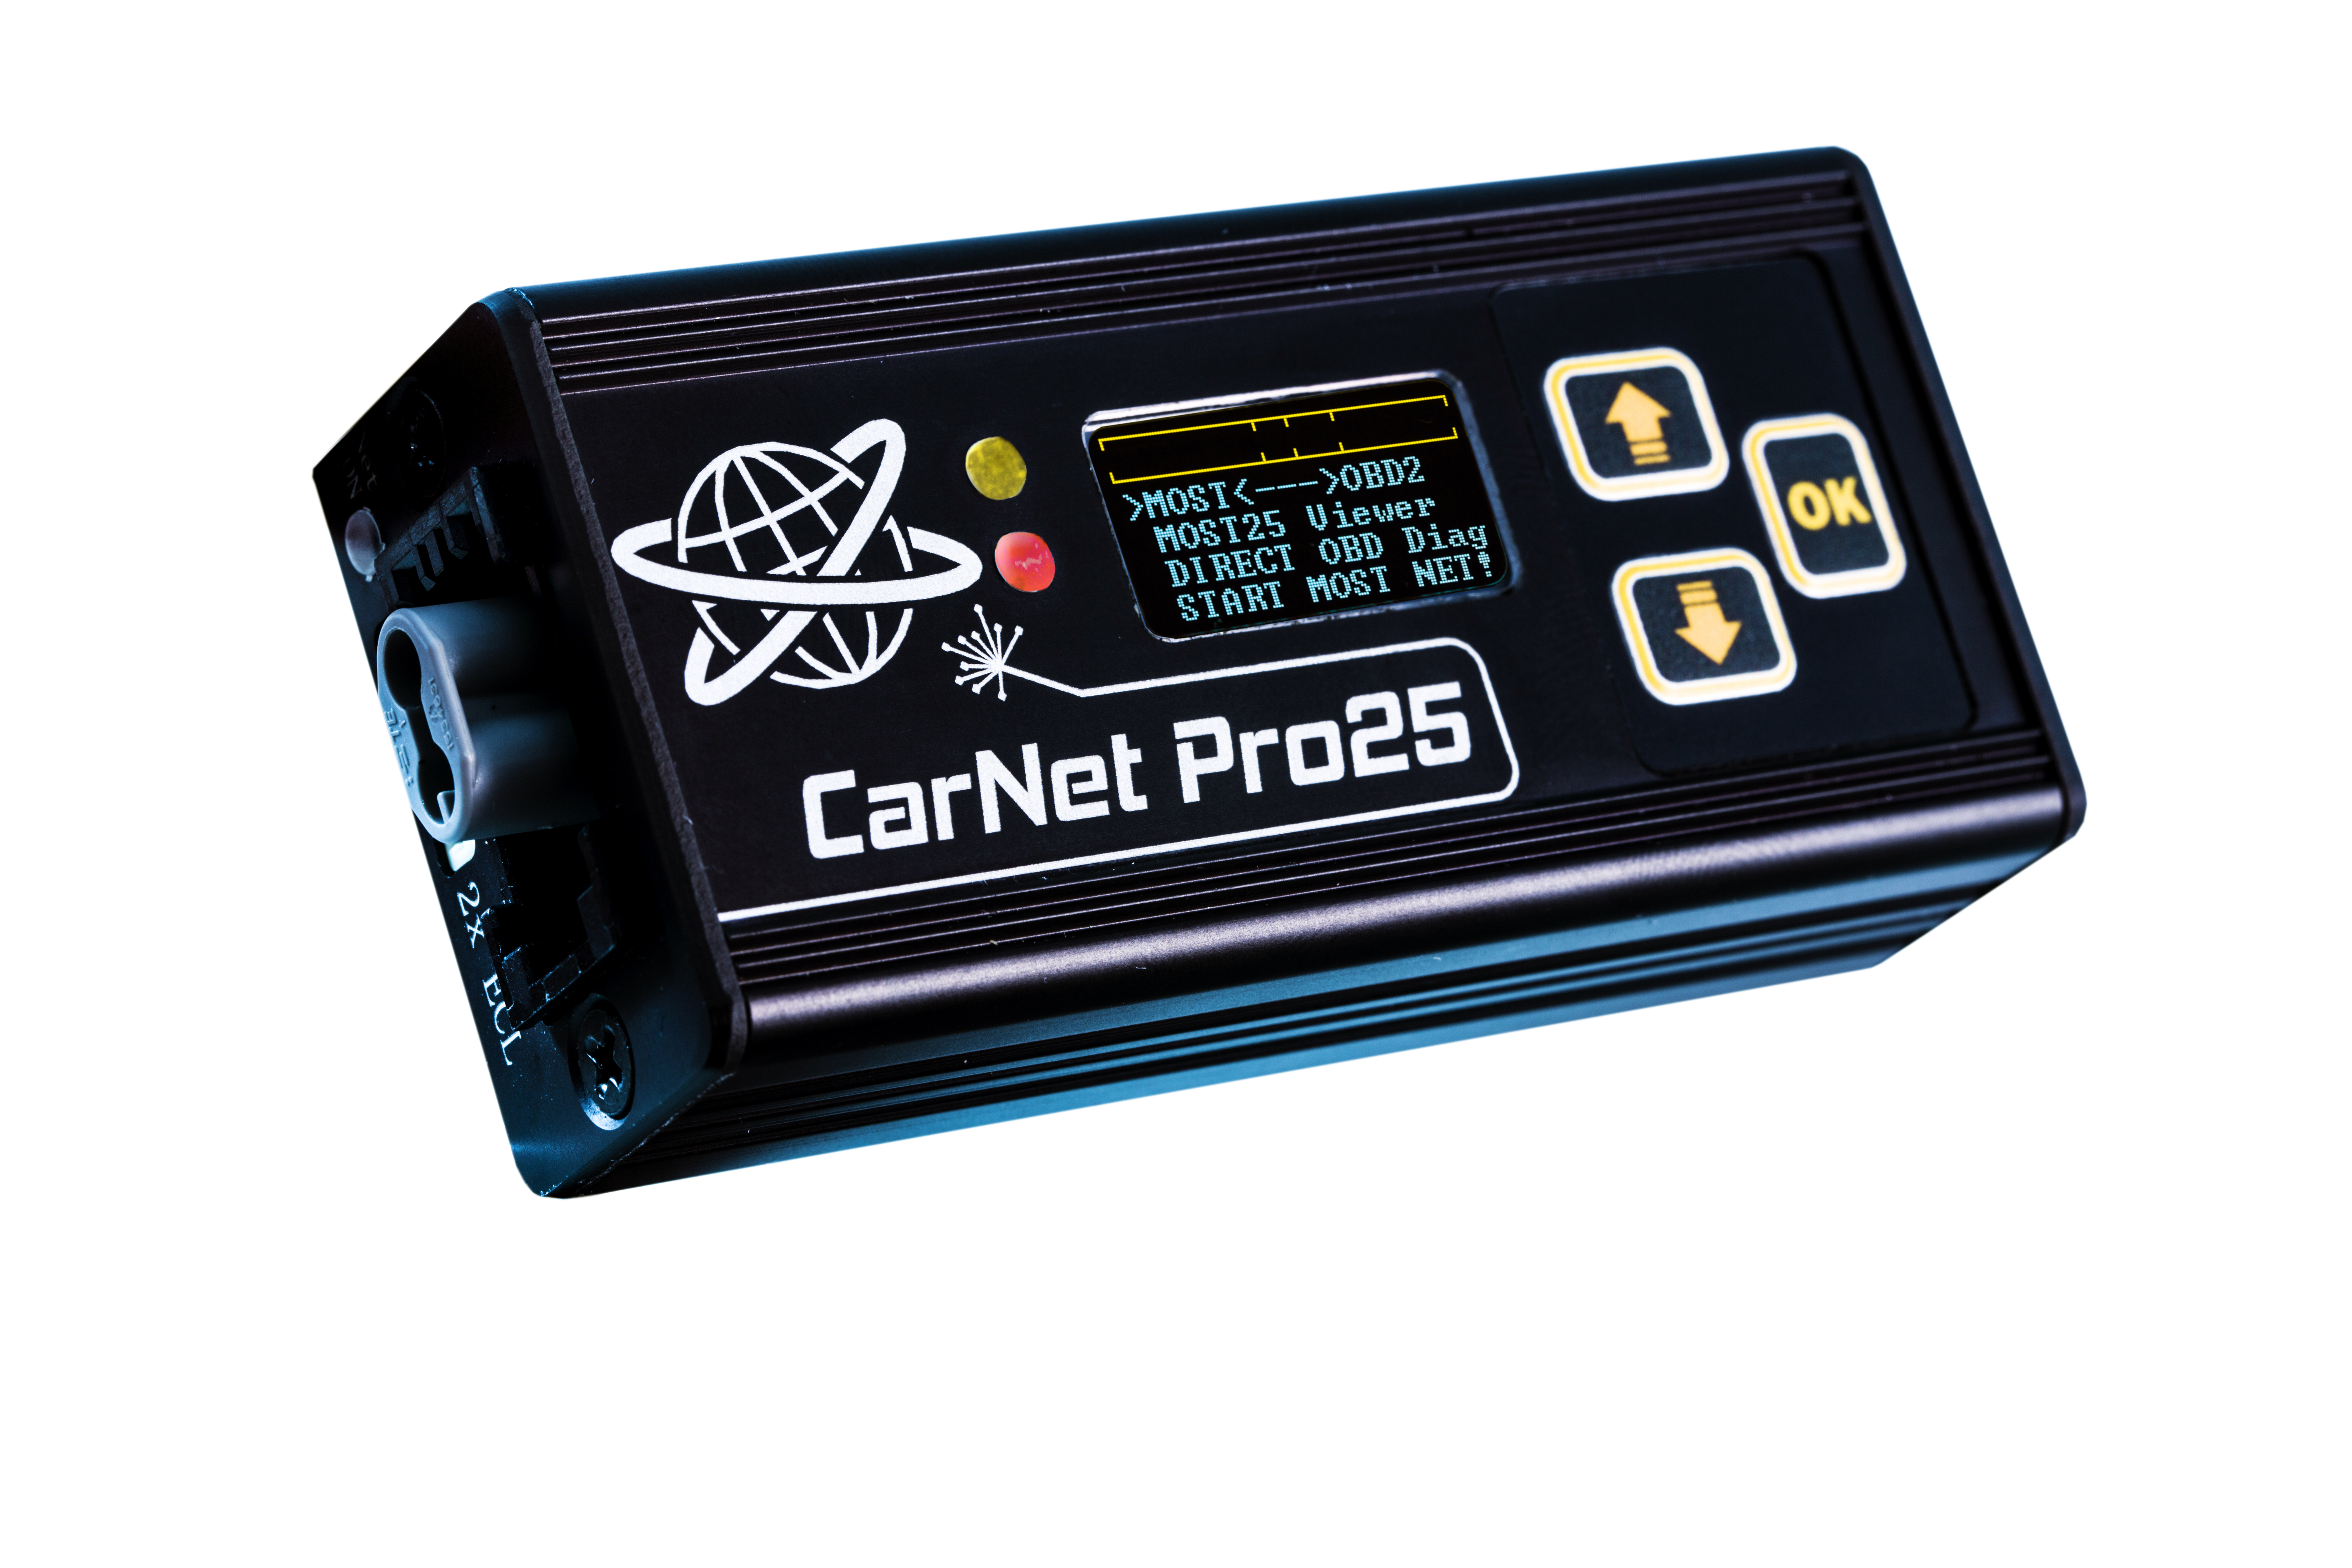 CarNet Pro25 Does Not Have Any Competitors 100% Exceptional Design Unique And Professional MOST System Based Device For Automotive Diagnostics And Electronic Module Reprogramming